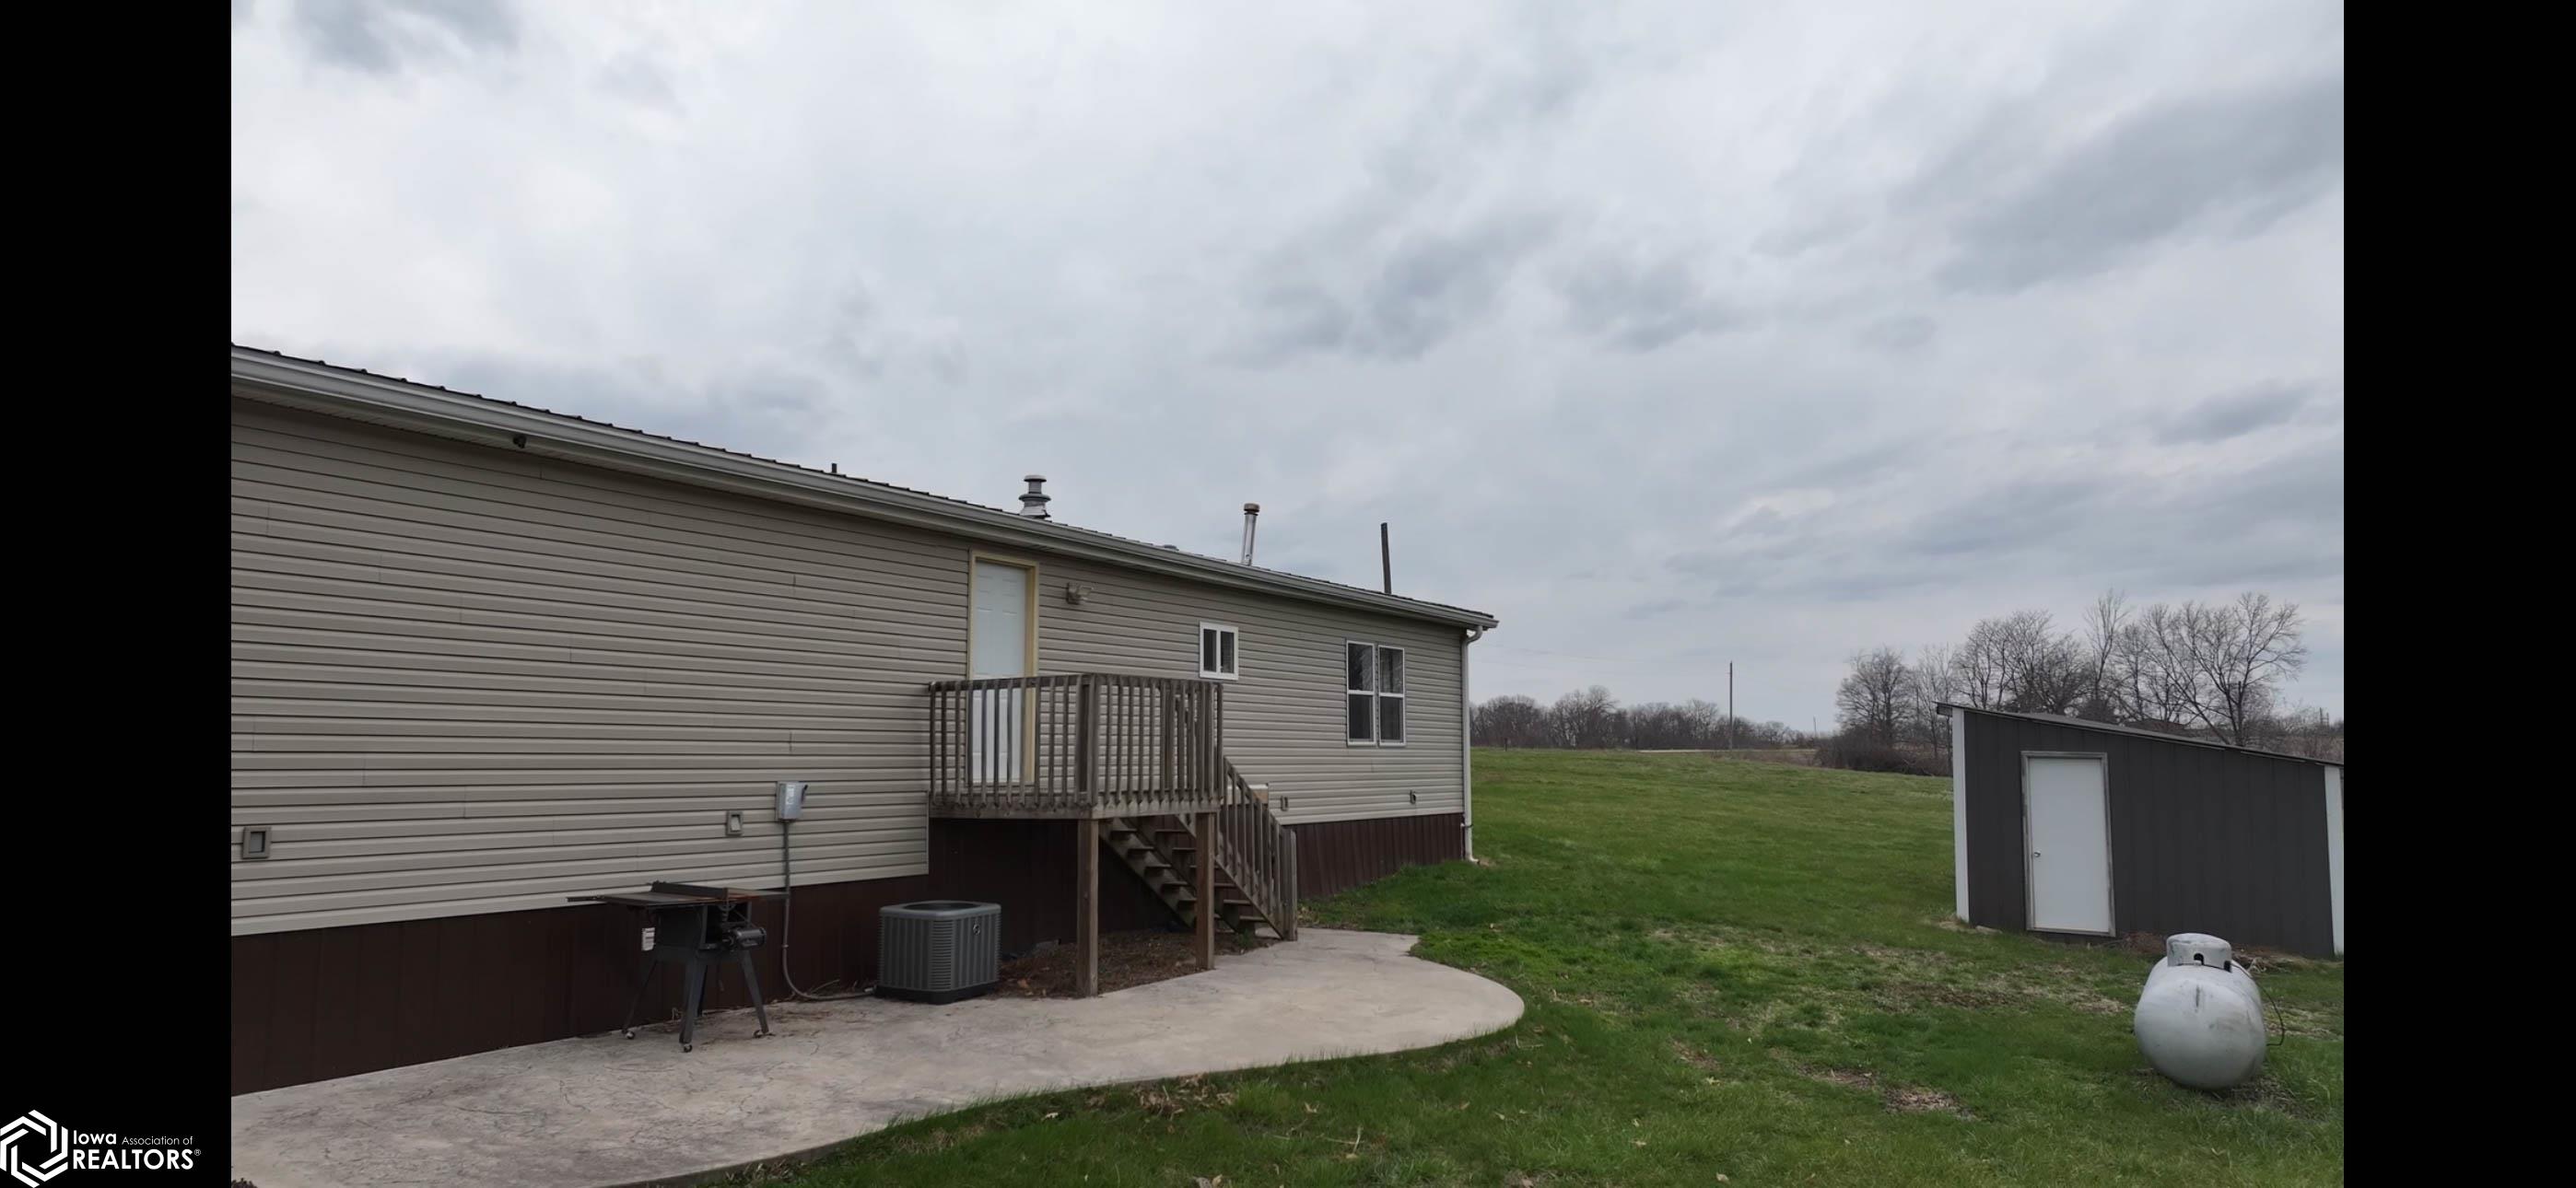 9185 28th, Ottumwa, Iowa 52501, 3 Bedrooms Bedrooms, ,2 BathroomsBathrooms,Single Family,For Sale,28th,6316067